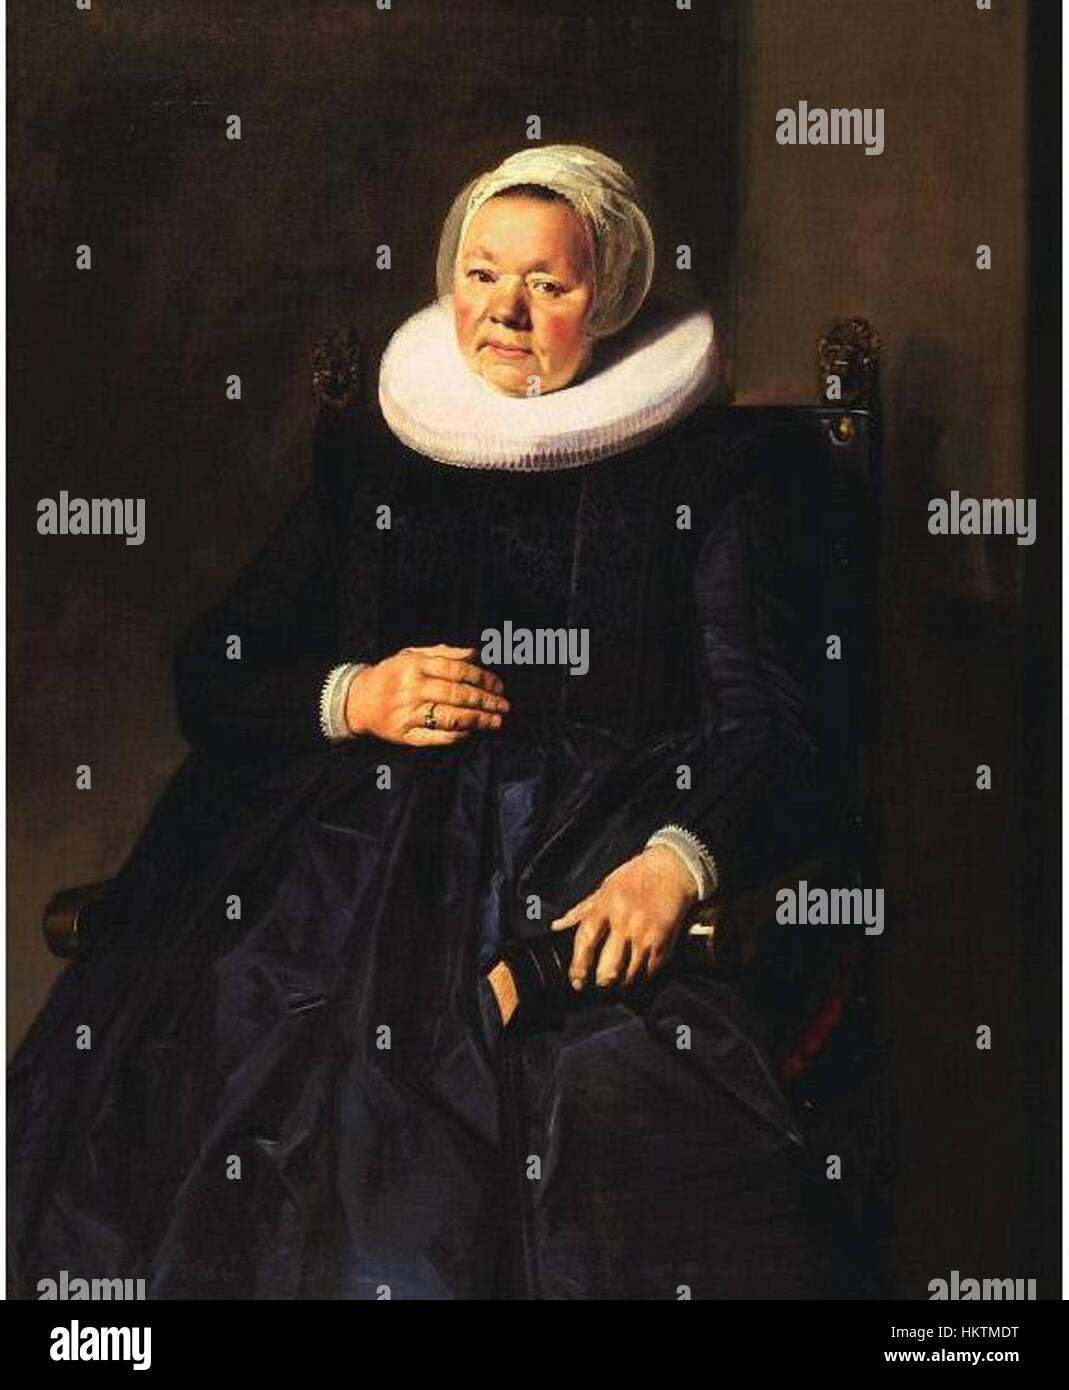 Frans Hals - Portrait of a woman in 1635 - Frick 1910.1.72 Stock Photo